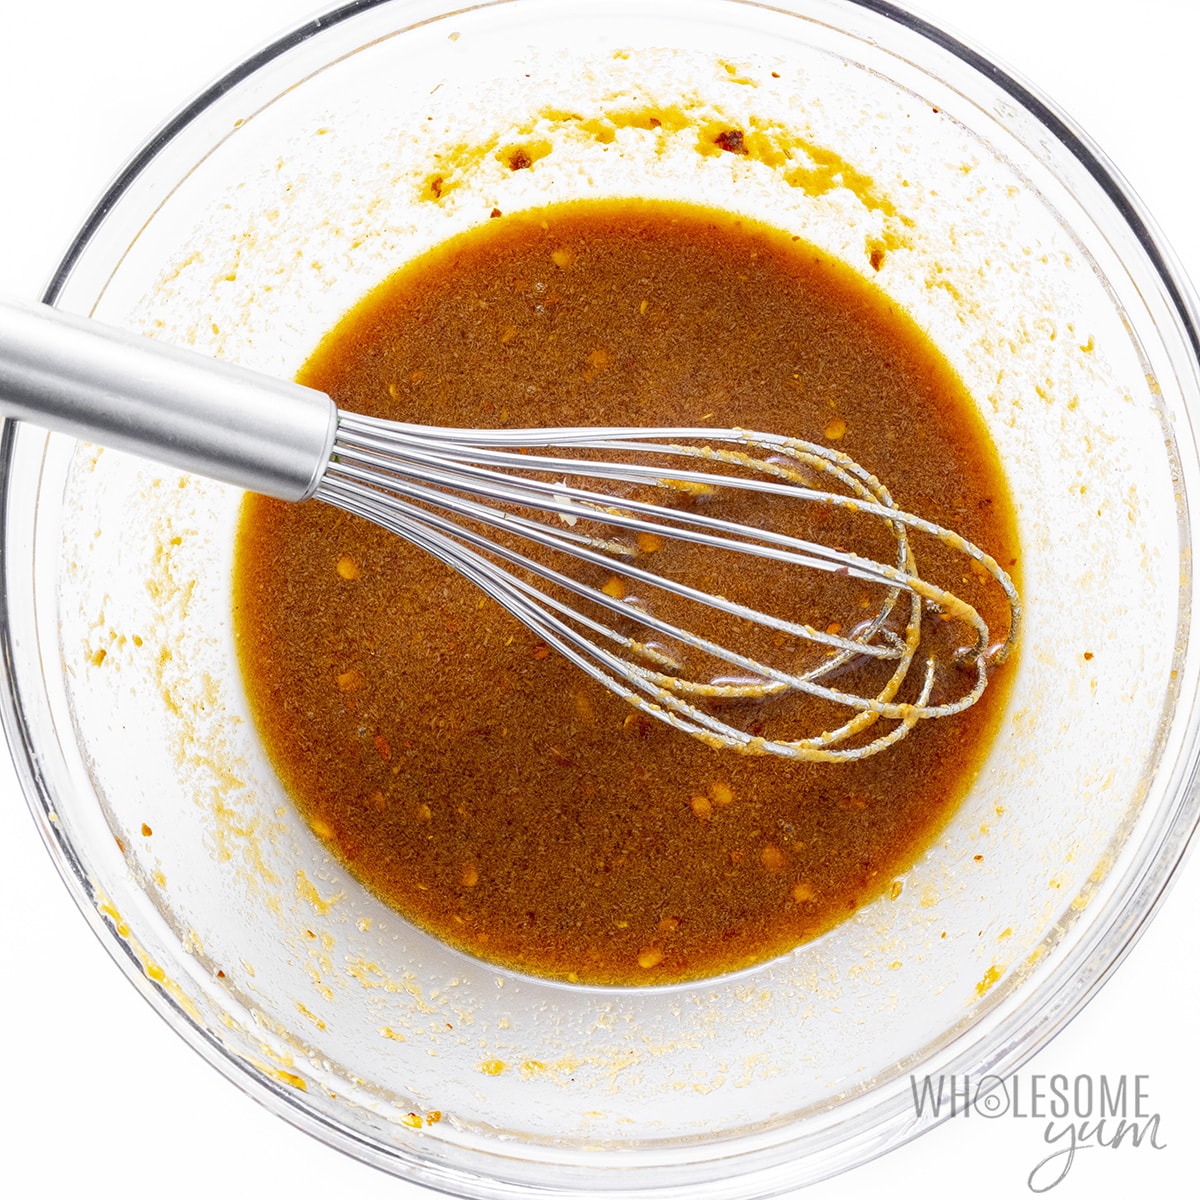 Sauce whisked in a bowl.